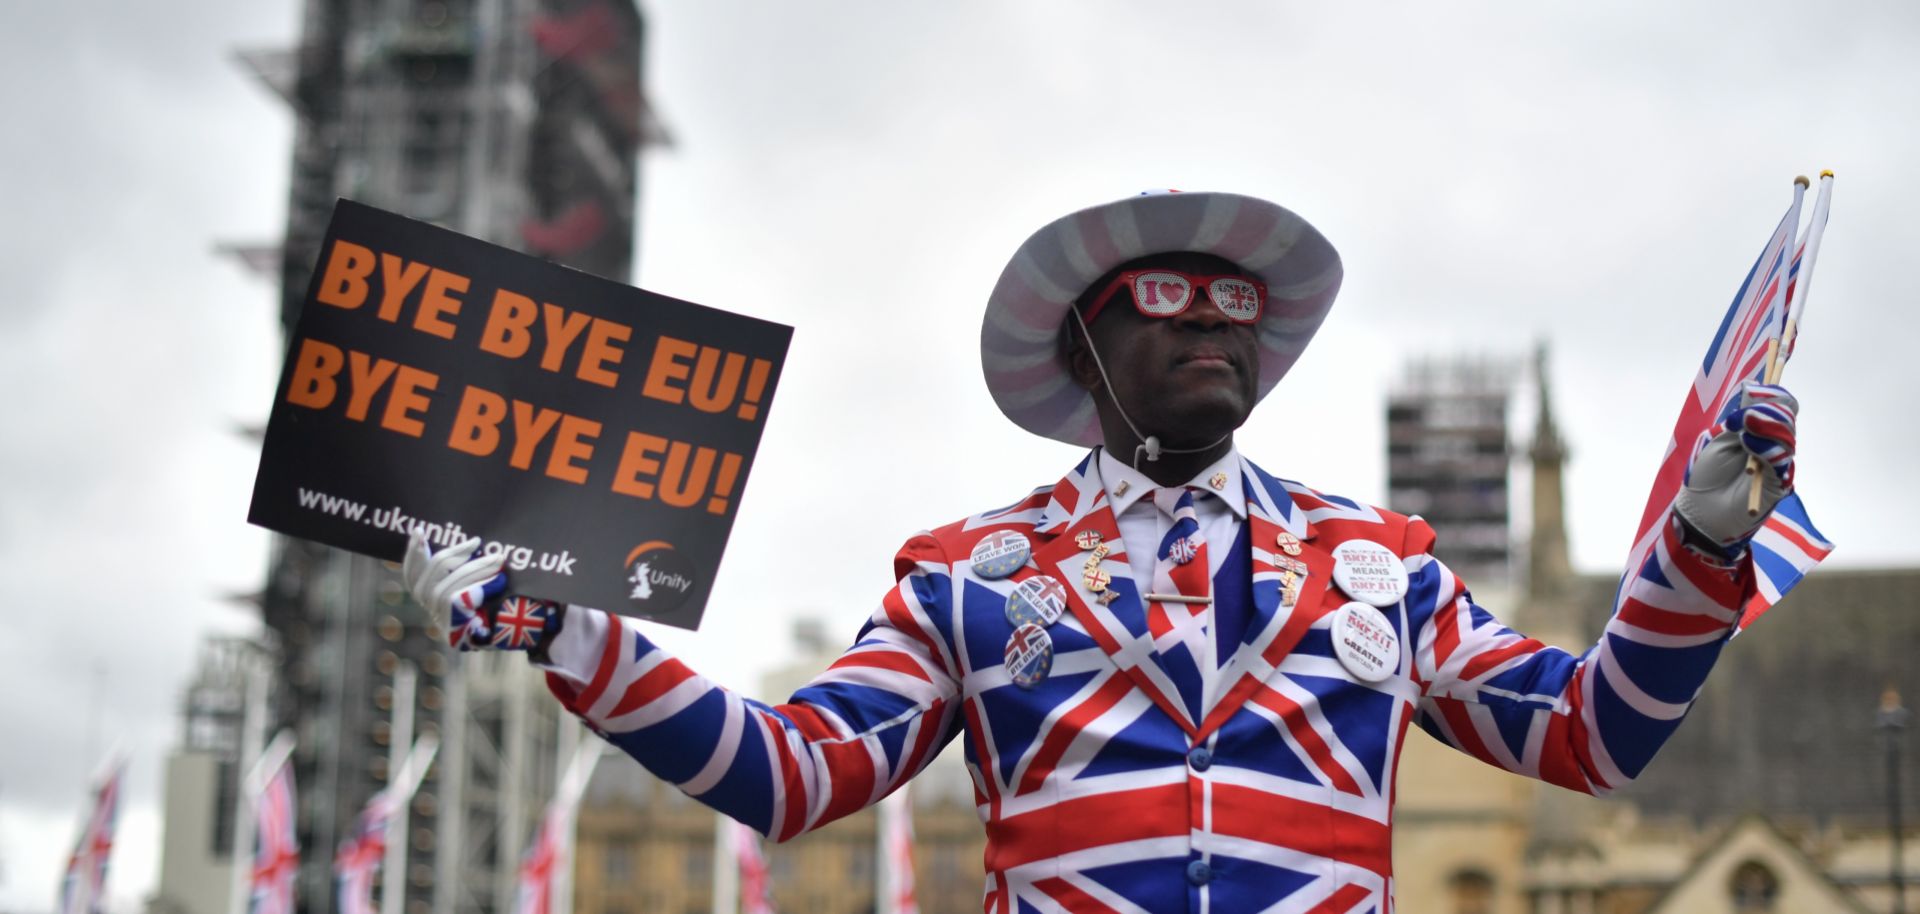 This photo shows Brexit supporter Joseph Afrane dressed up in London's Parliament Square to celebrate the impending departure of the United Kingdom from the European Union on Jan. 31.